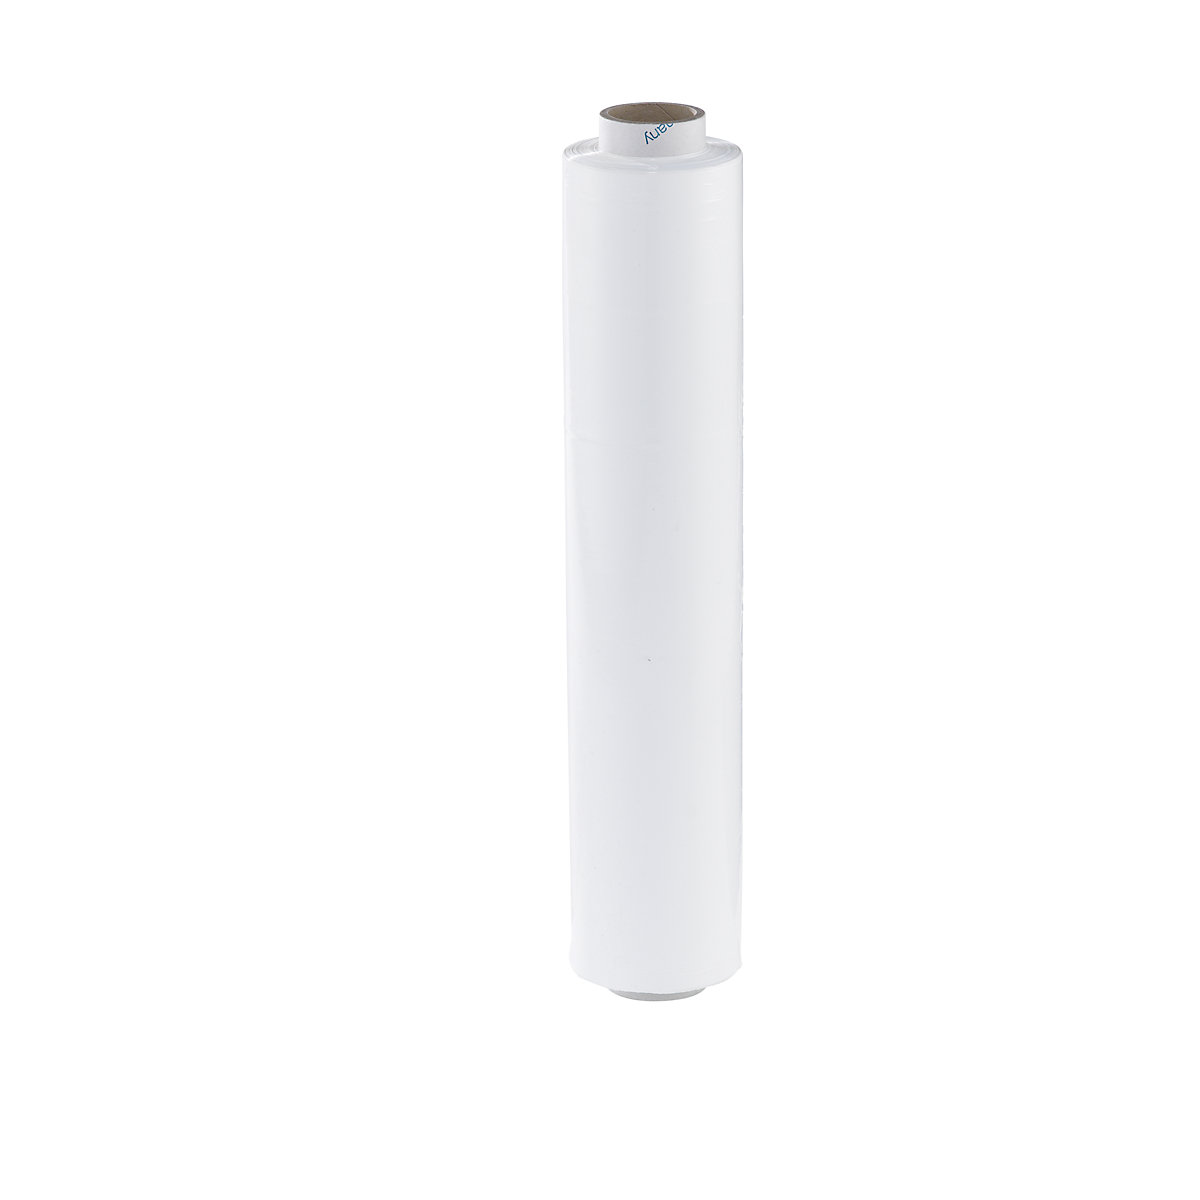 PE manual stretch film, pack of 6 rolls, width 500 mm, film thickness 23 µm, white, 4+ packs-4